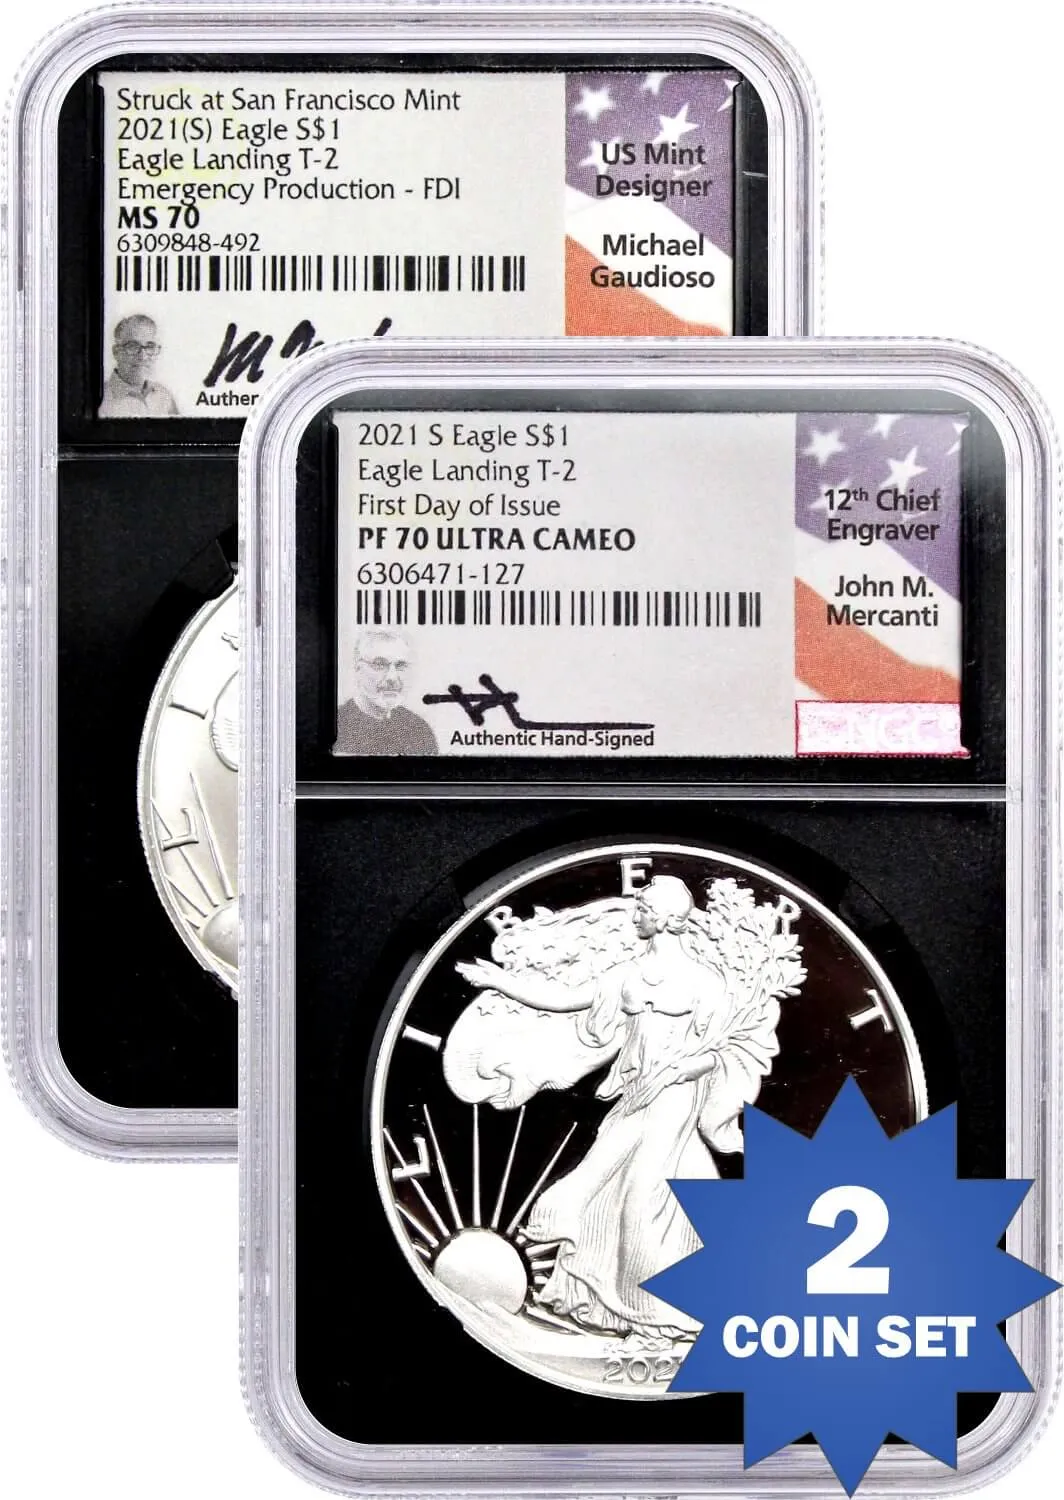 2021 S & (S) $1 Silver Eagle Type 2 Struck at San Francisco 2 Coin Set NGC PF70 Ultra Cameo & MS70 First Day of Issue Mercanti Signature & Gaudioso Signature Black Core